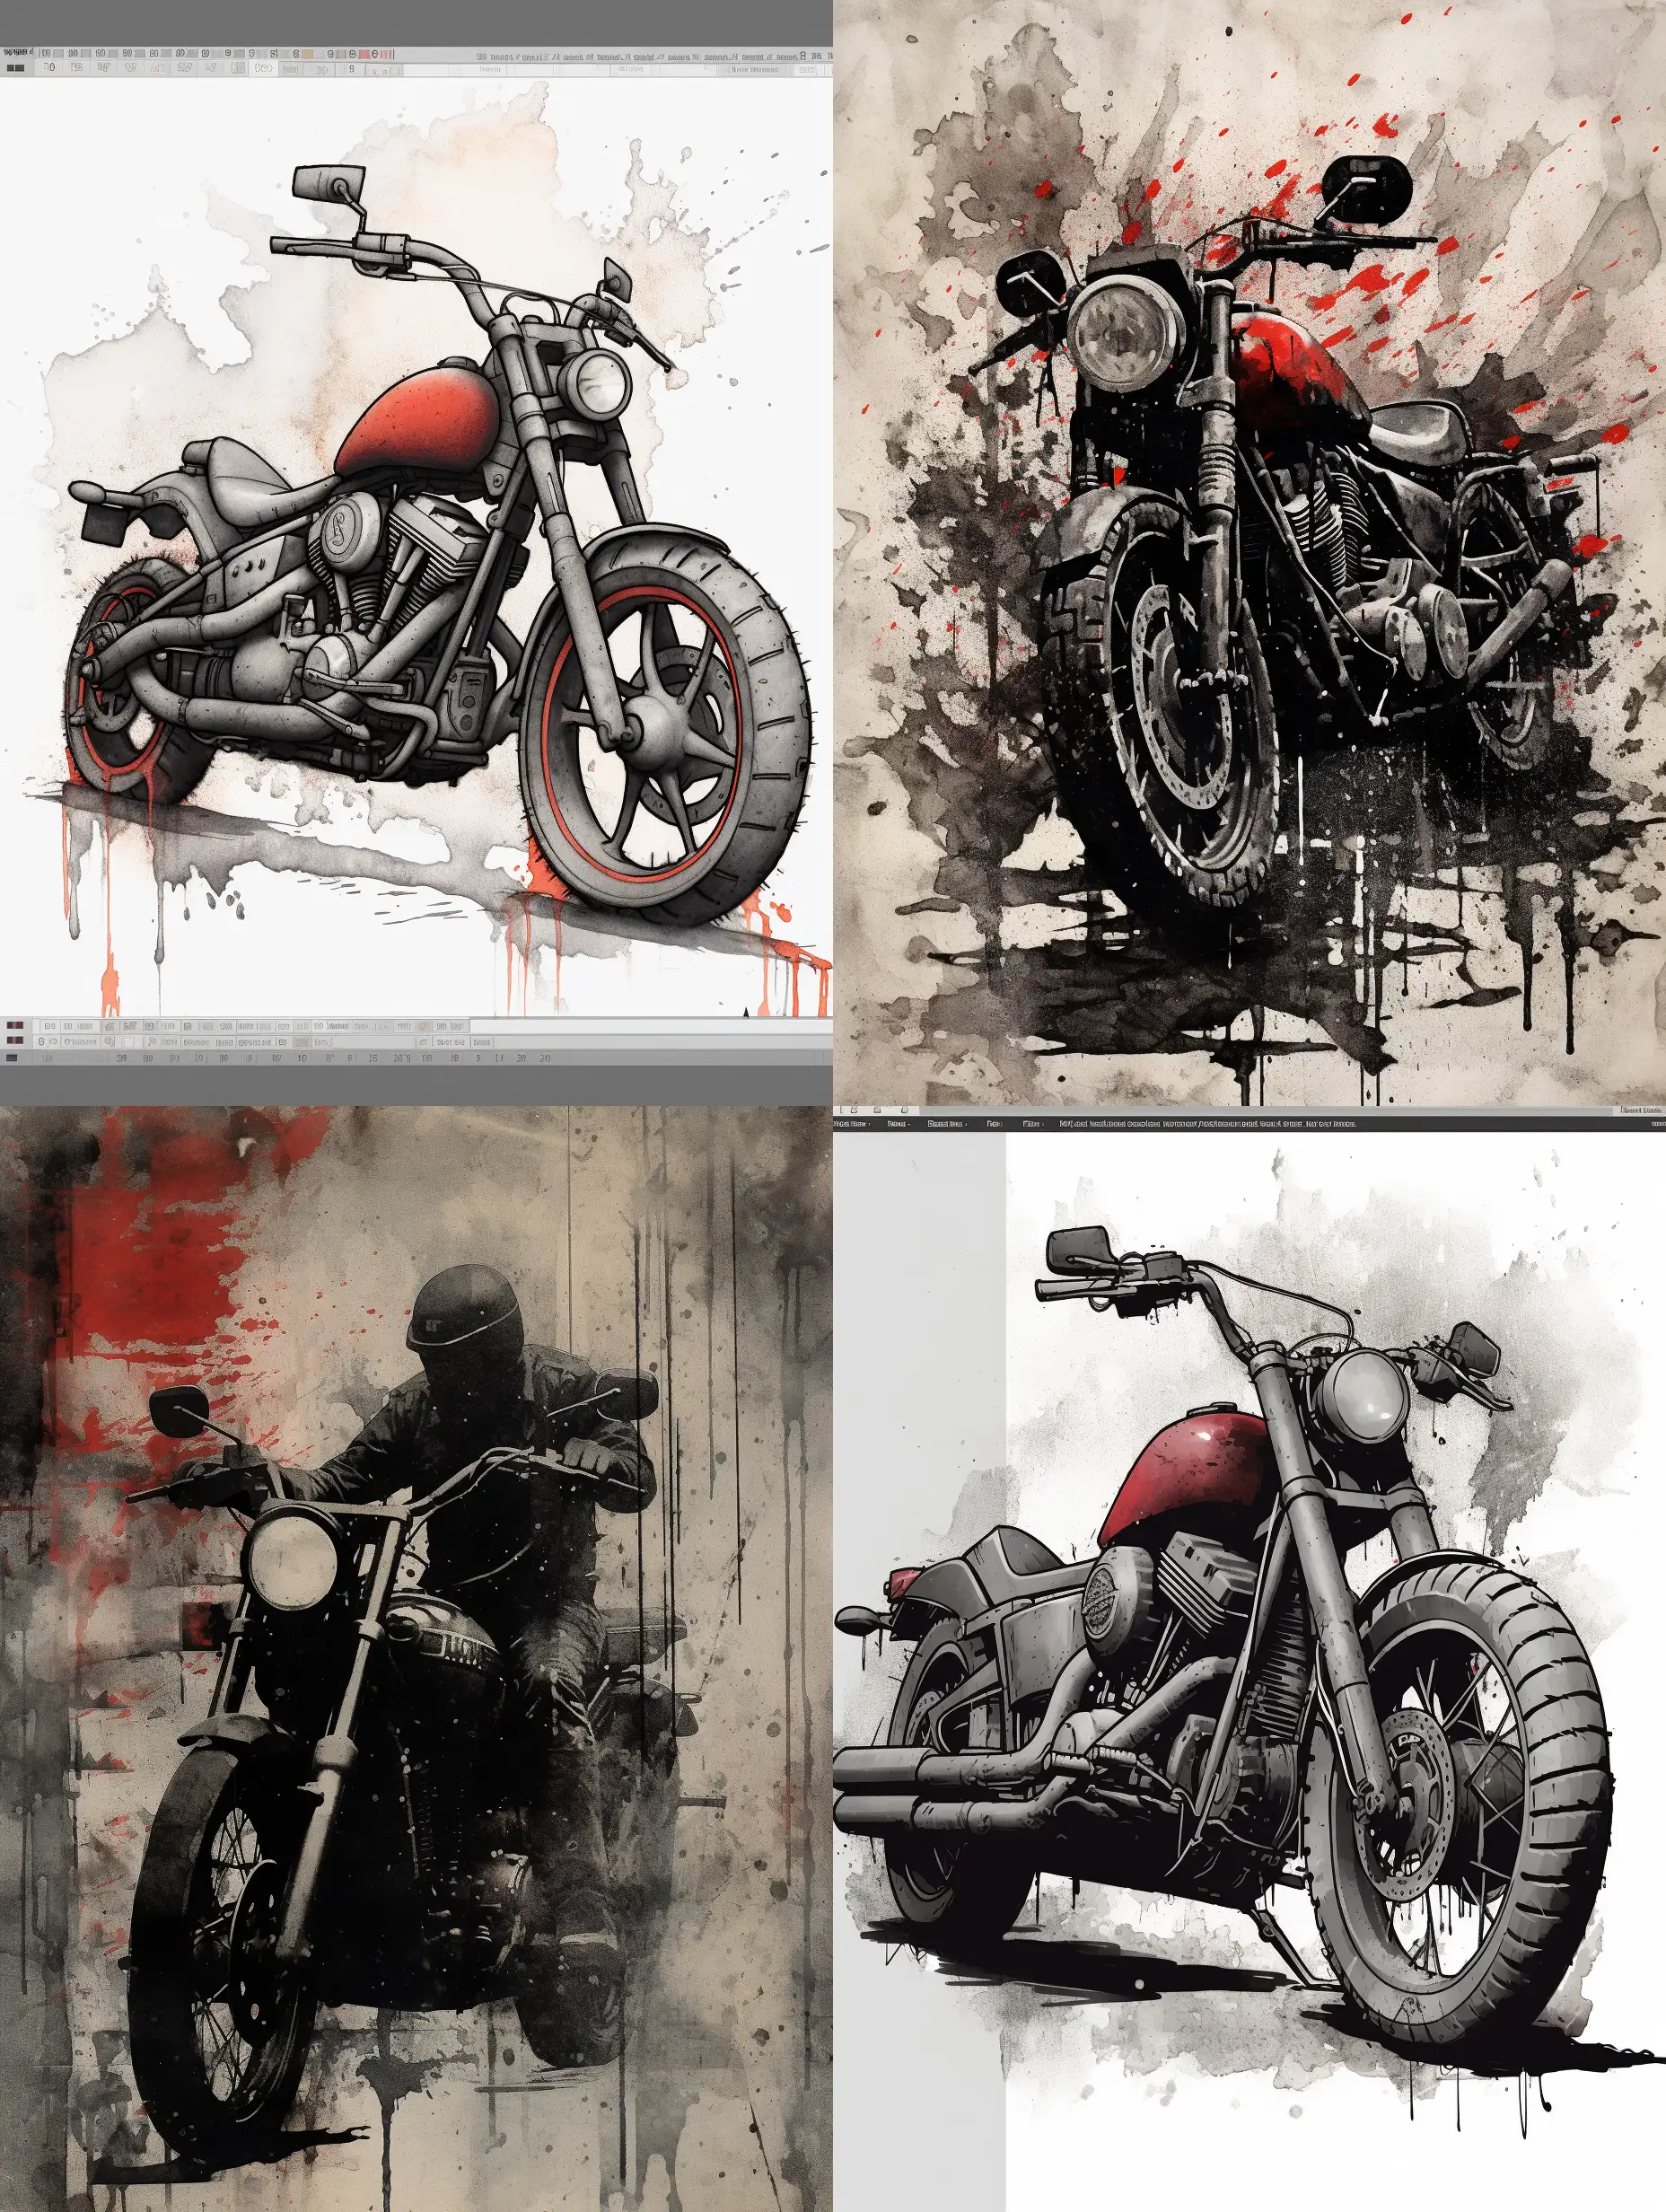 GrungeInspired-Motorcycle-Design-with-Rough-Textures-and-Moody-Palette